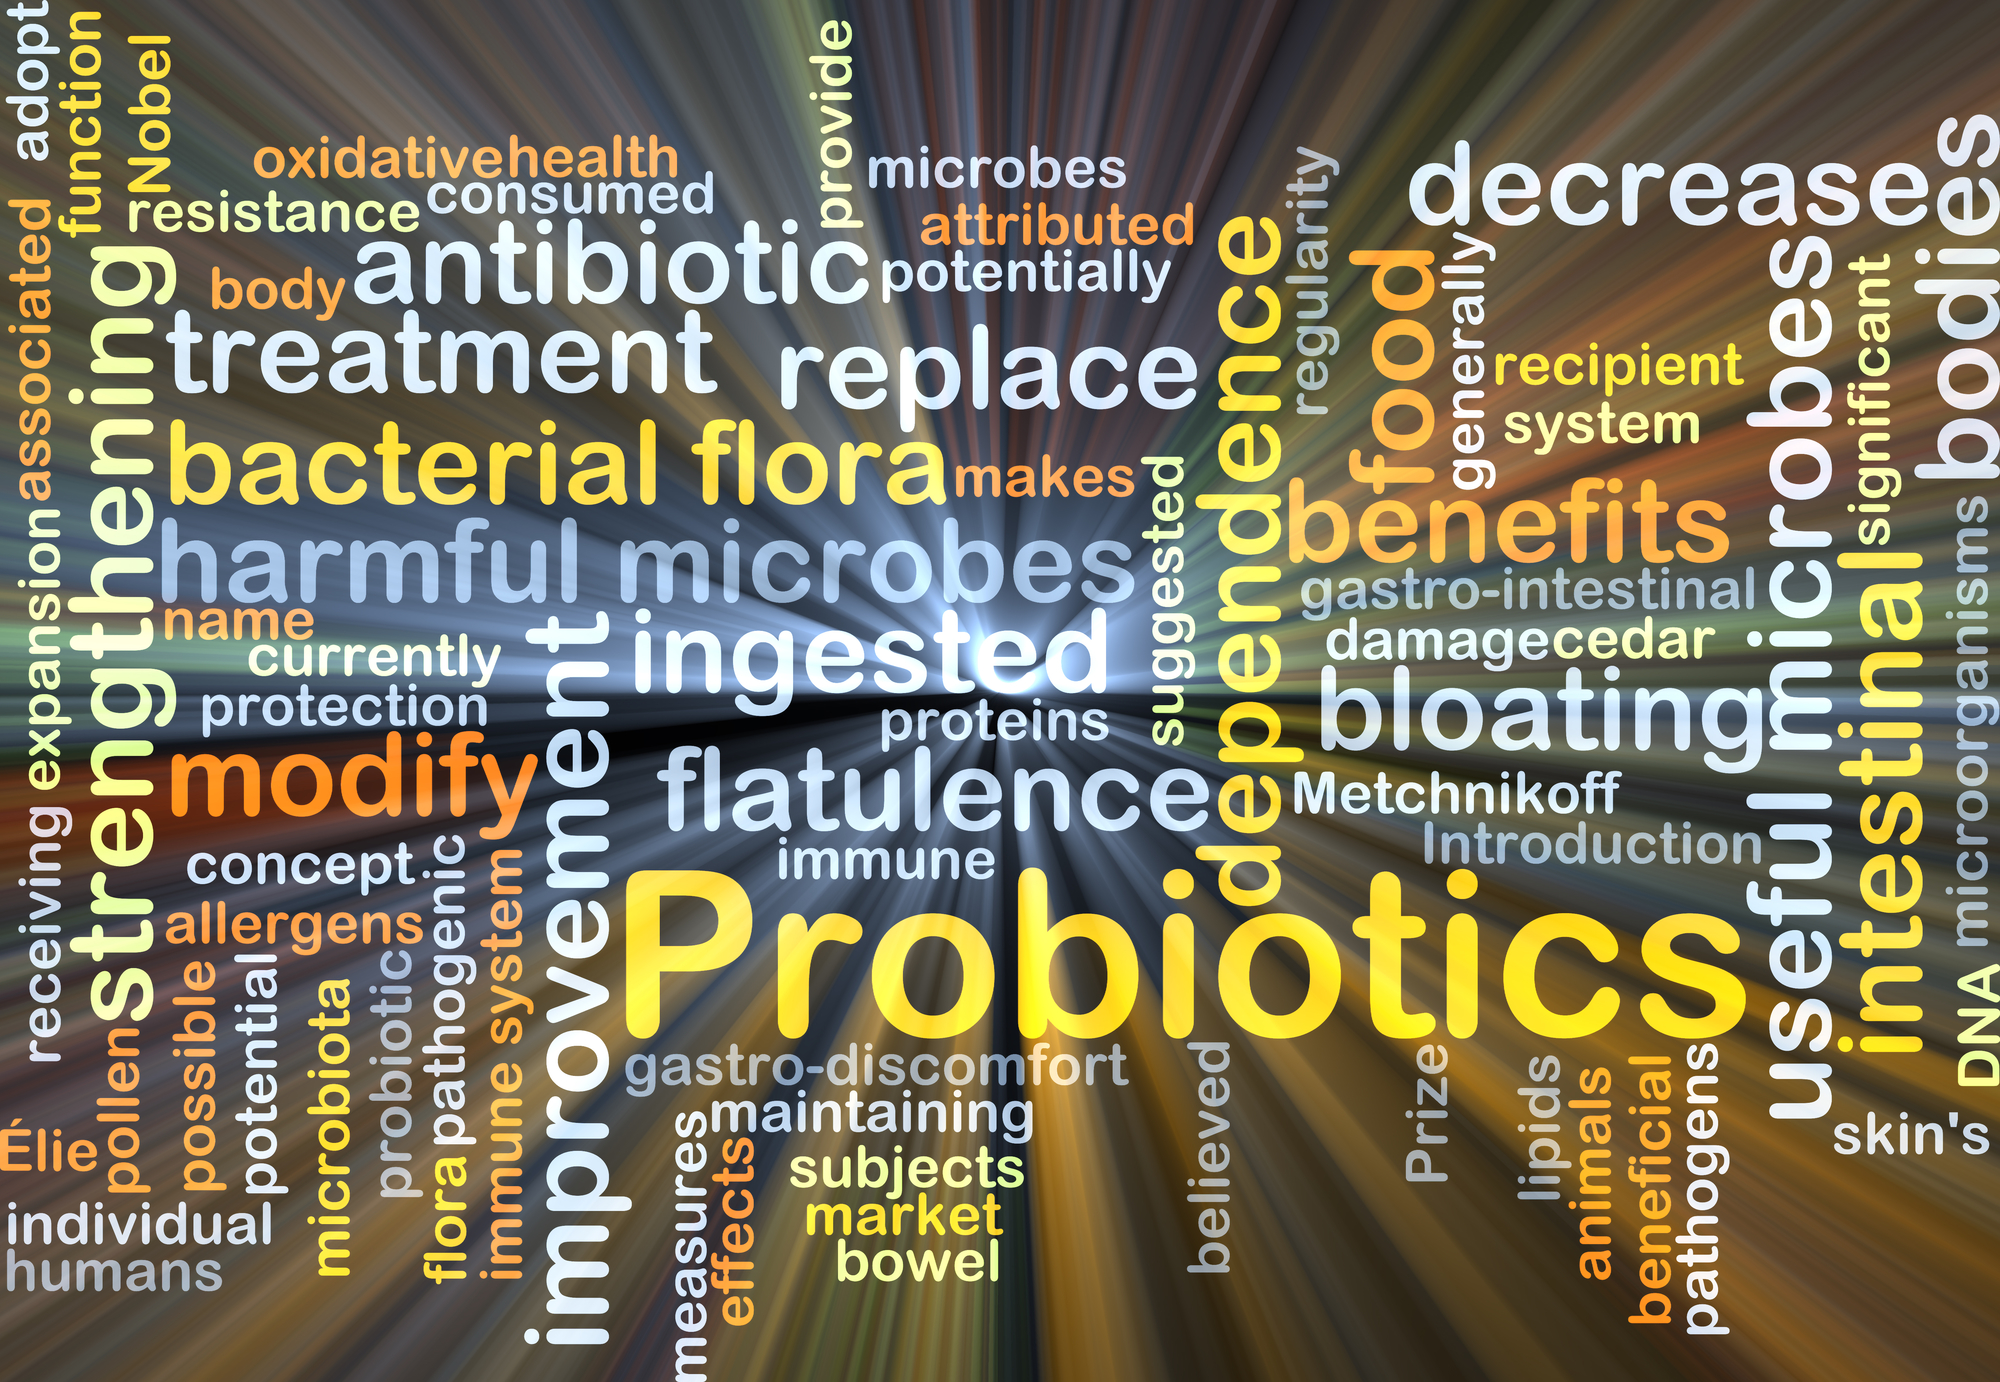 Probiotics: The Building Blocks for a Strong and Healthy Immune System